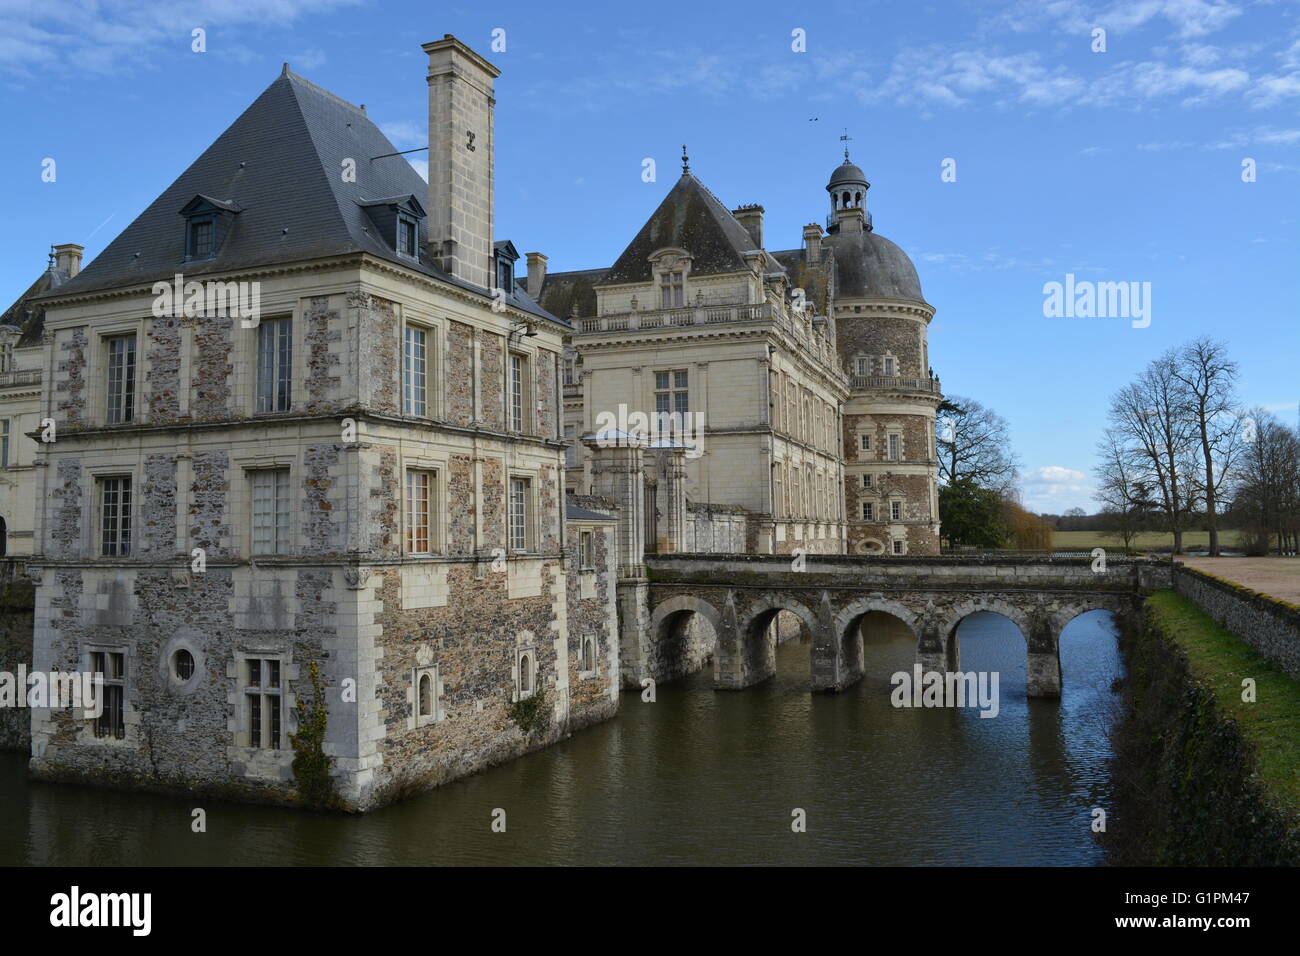 Chateau de Serrant - A stately home style chateau in the Loire Valley. Situated 15km from the town of Angers. Stock Photo